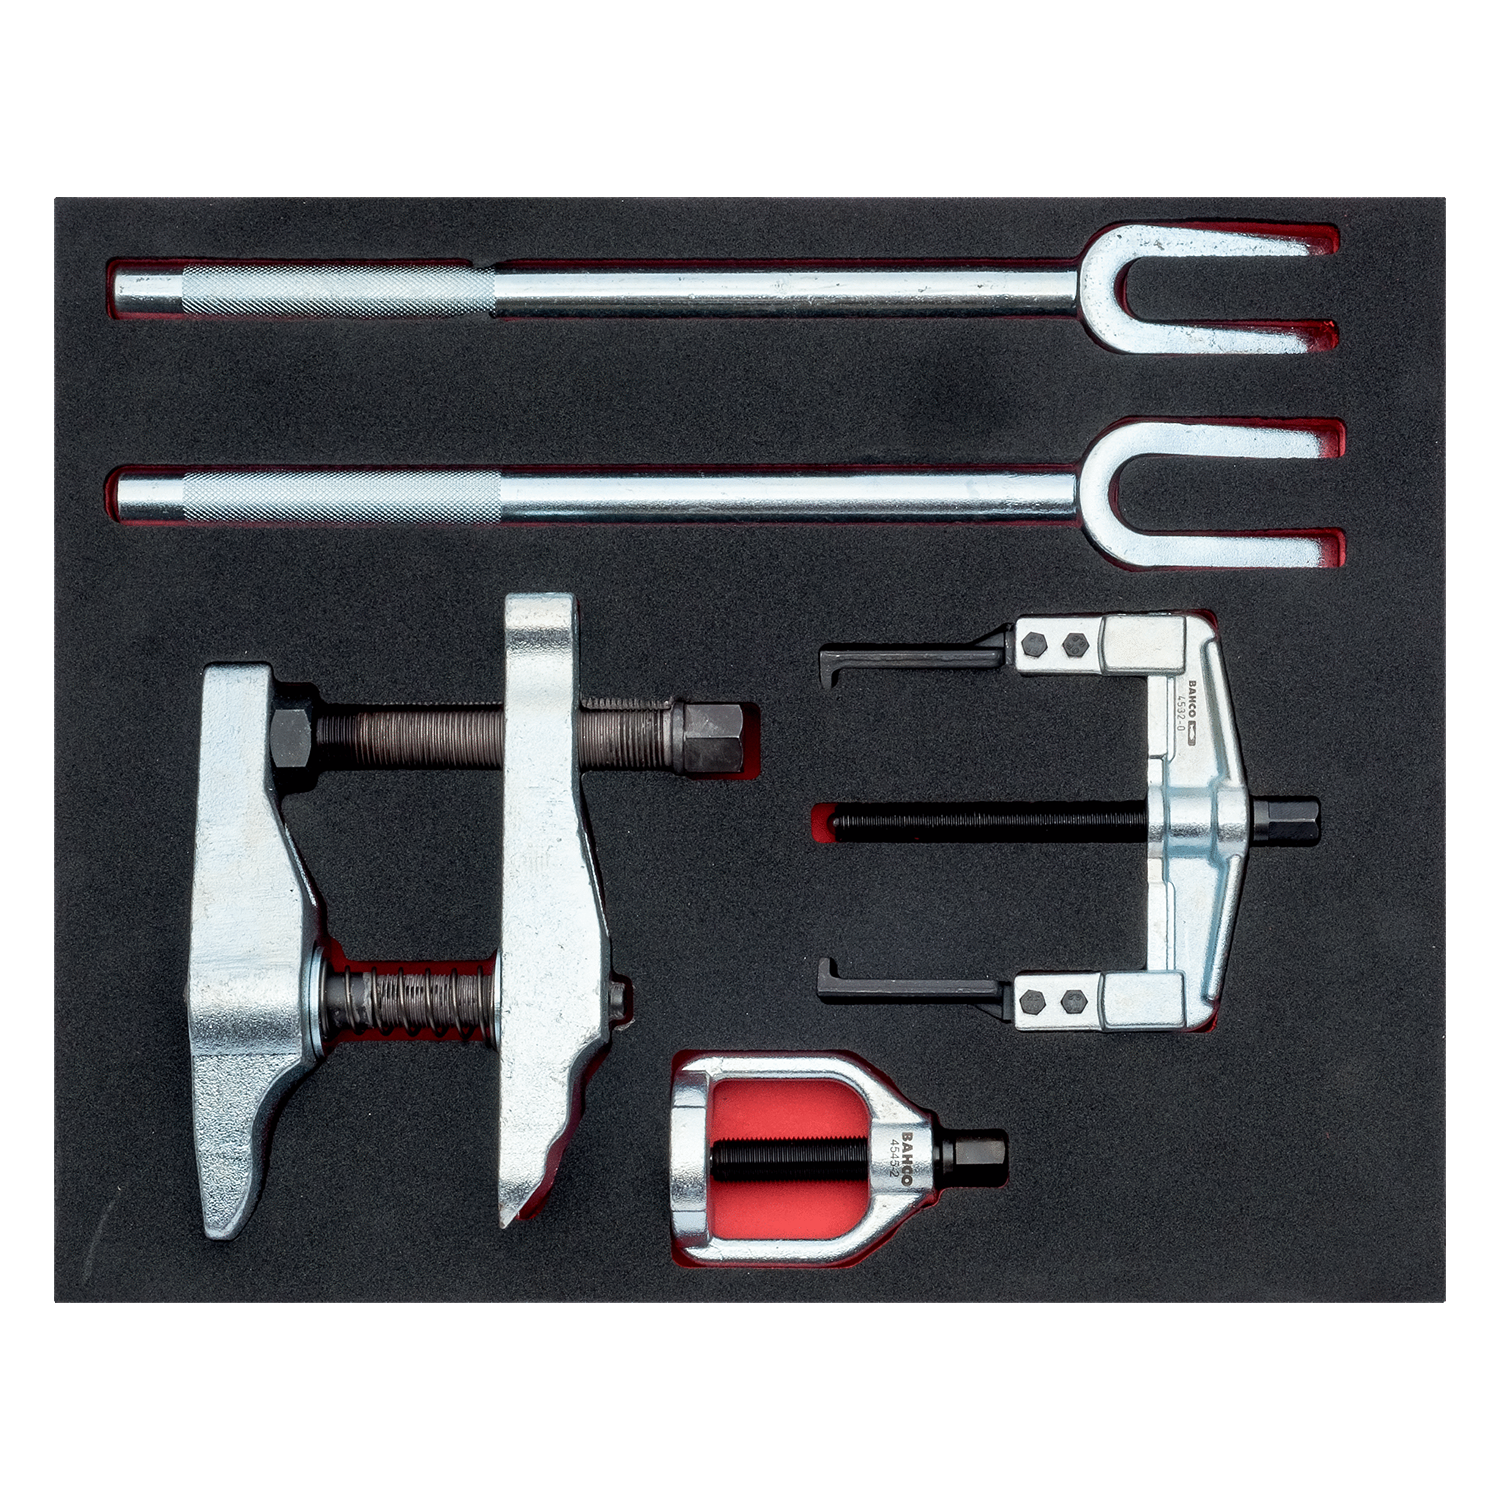 BAHCO FF1F5009 Fit&Go 2/3 Foam Inlay Puller/Joint Fork Set 5 Pcs - Premium Puller/Joint Fork Set from BAHCO - Shop now at Yew Aik.